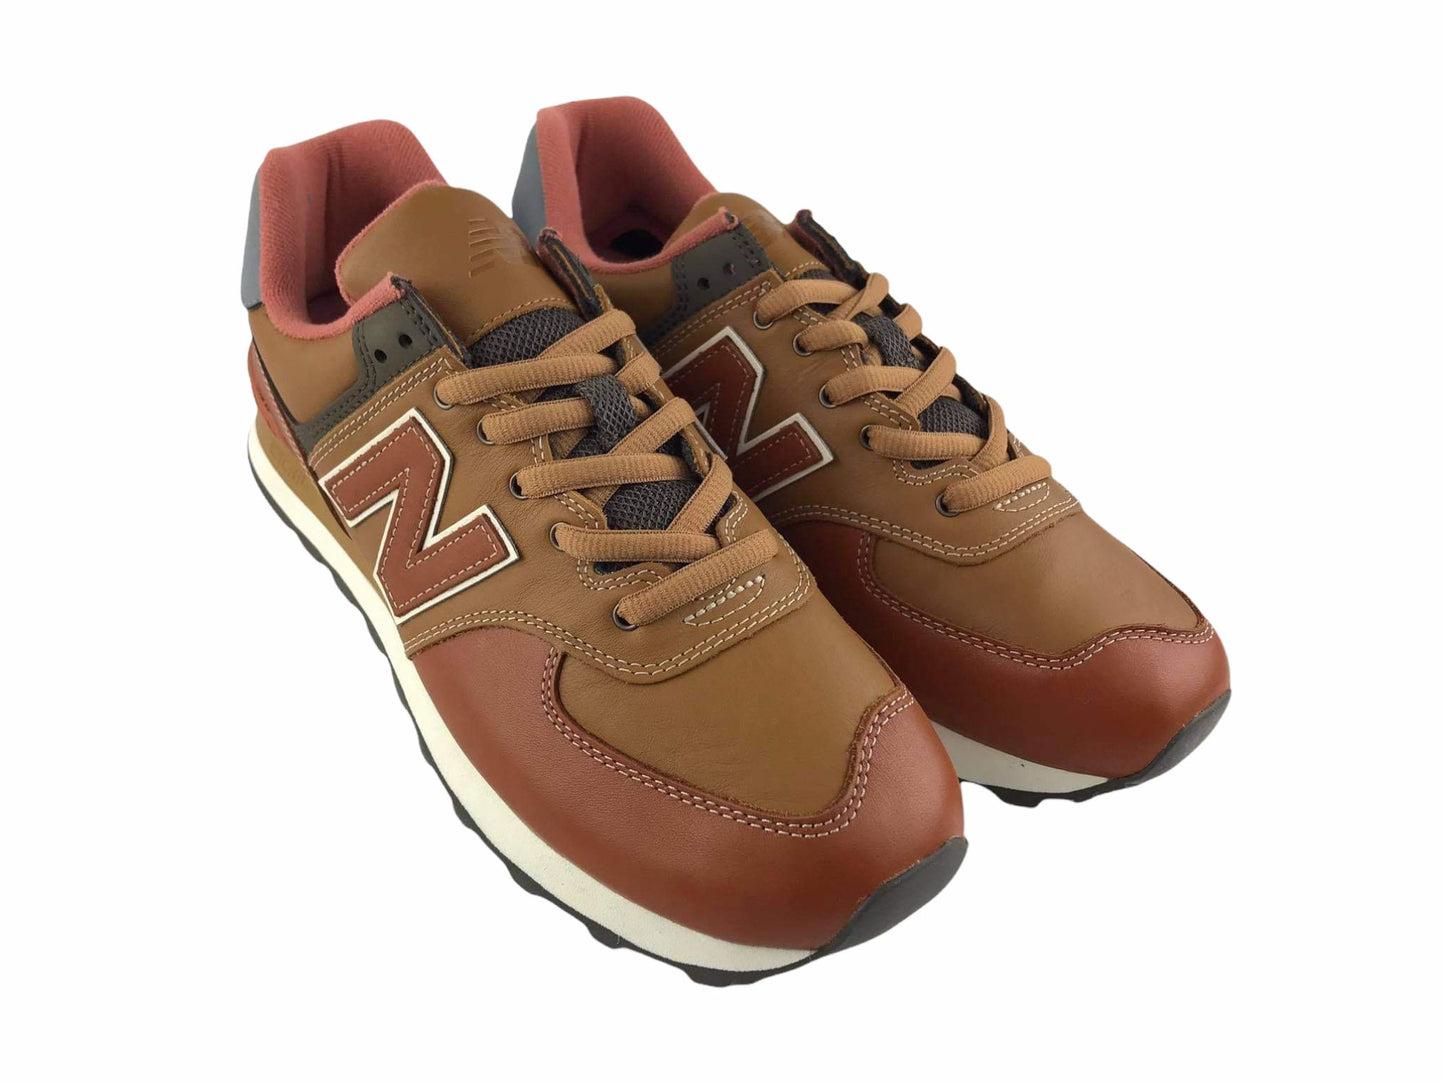 New Balance | Mauricio Boy sneakers with Leather and Mustard color laces